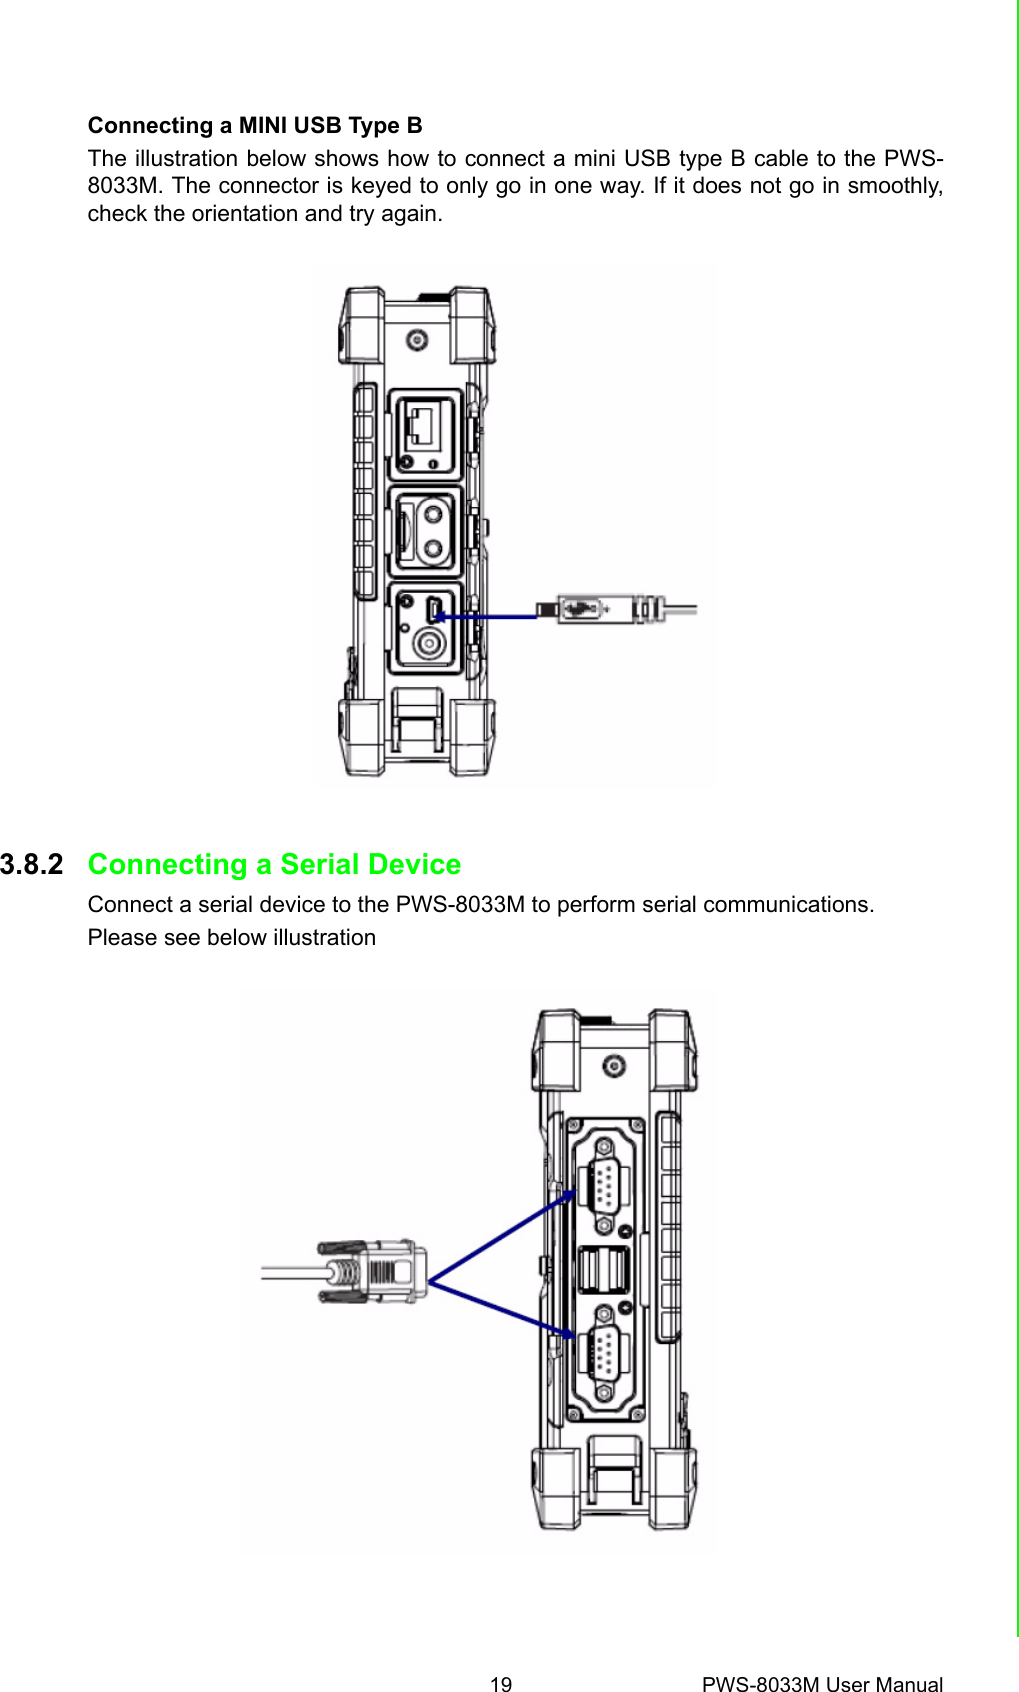 19 PWS-8033M User ManualChapter 3 Using the HardwareConnecting a MINI USB Type BThe illustration below shows how to connect a mini USB type B cable to the PWS-8033M. The connector is keyed to only go in one way. If it does not go in smoothly,check the orientation and try again.3.8.2 Connecting a Serial DeviceConnect a serial device to the PWS-8033M to perform serial communications.Please see below illustration